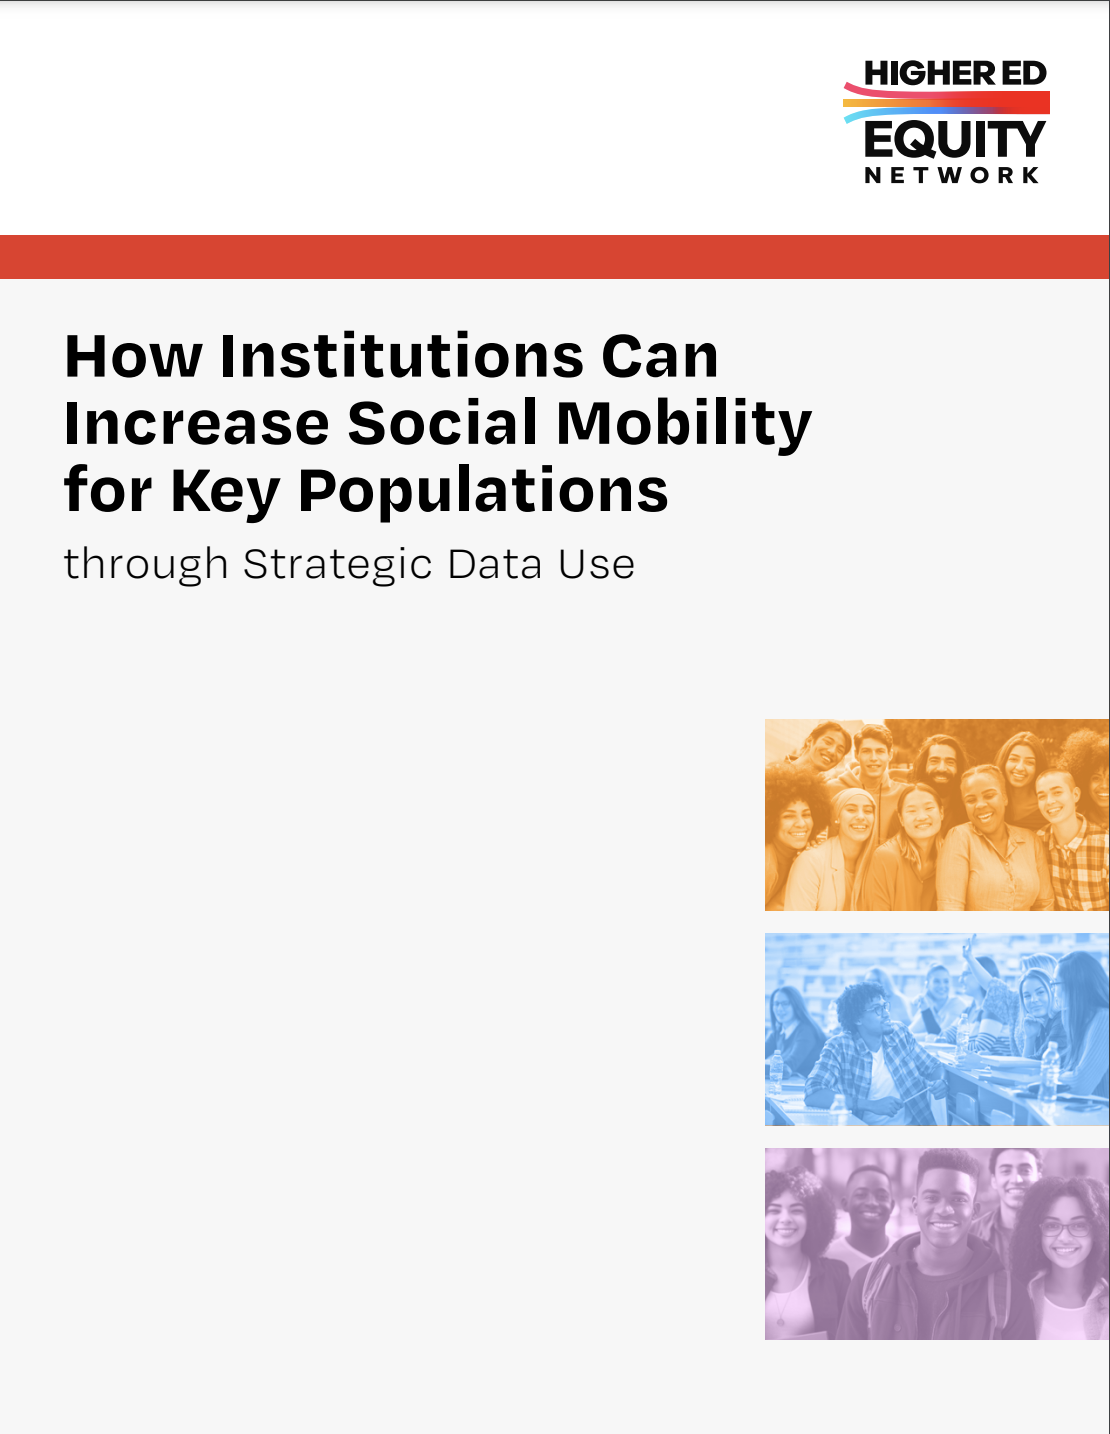 How Institutions Can Increase Social Mobility for Key Populations through Strategic Data Use